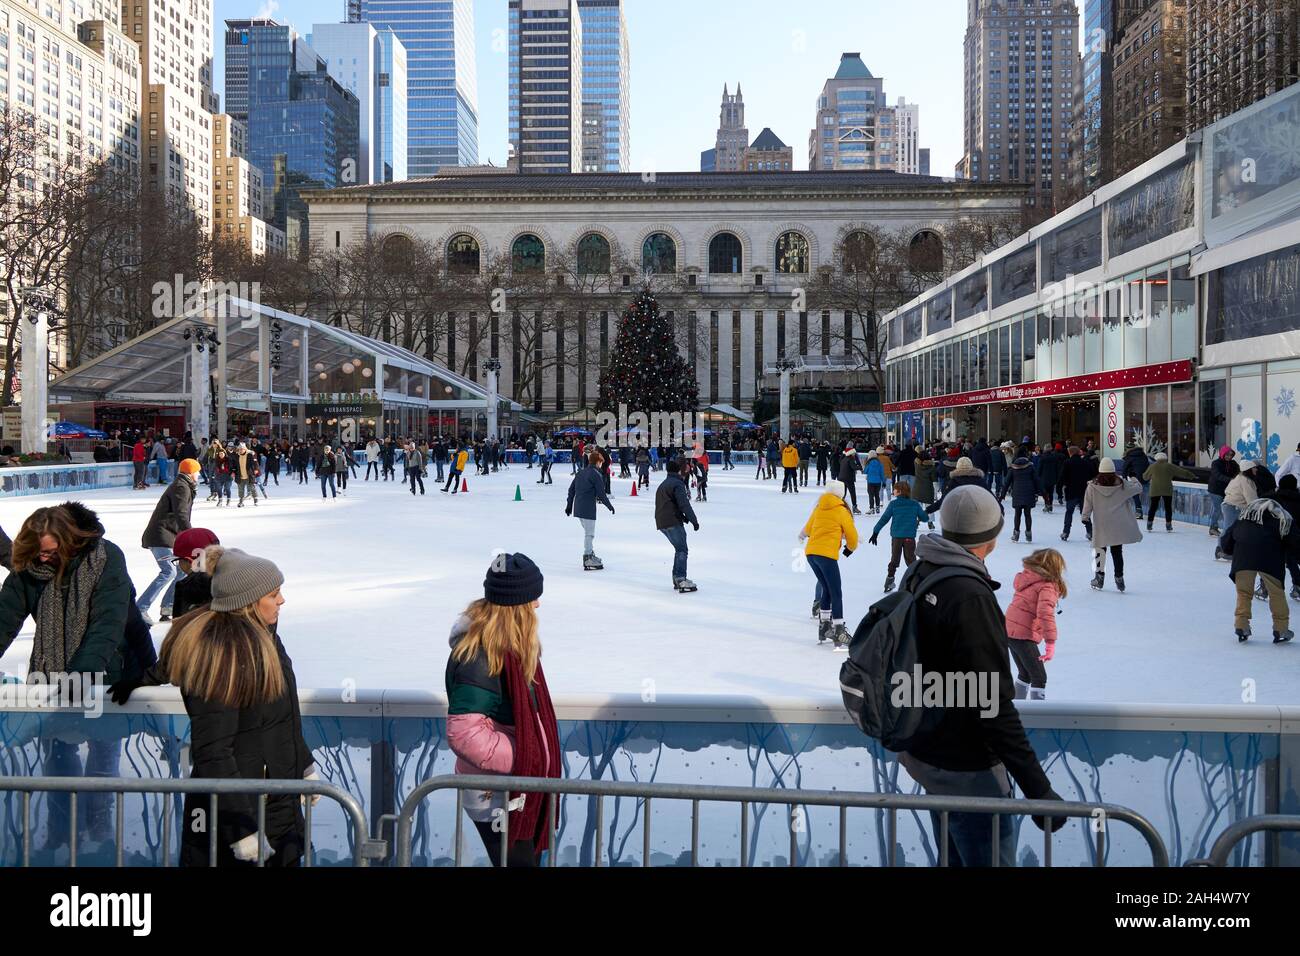 Ice skating, Shopping and Eating at Bryant Park, New York City, 20 Dec 2019 Stock Photo